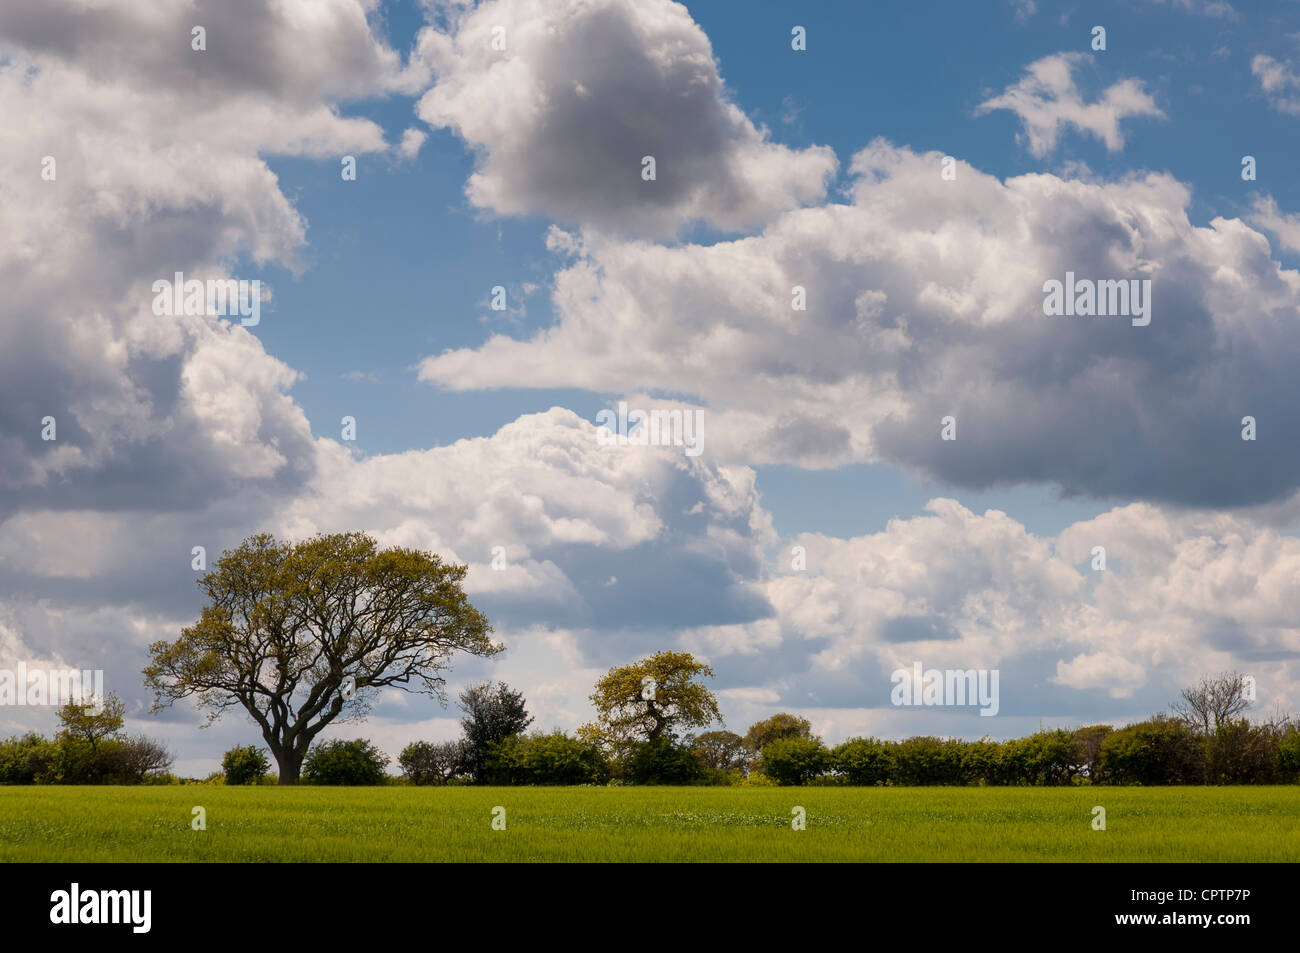 A tree in the English countryside Stock Photo